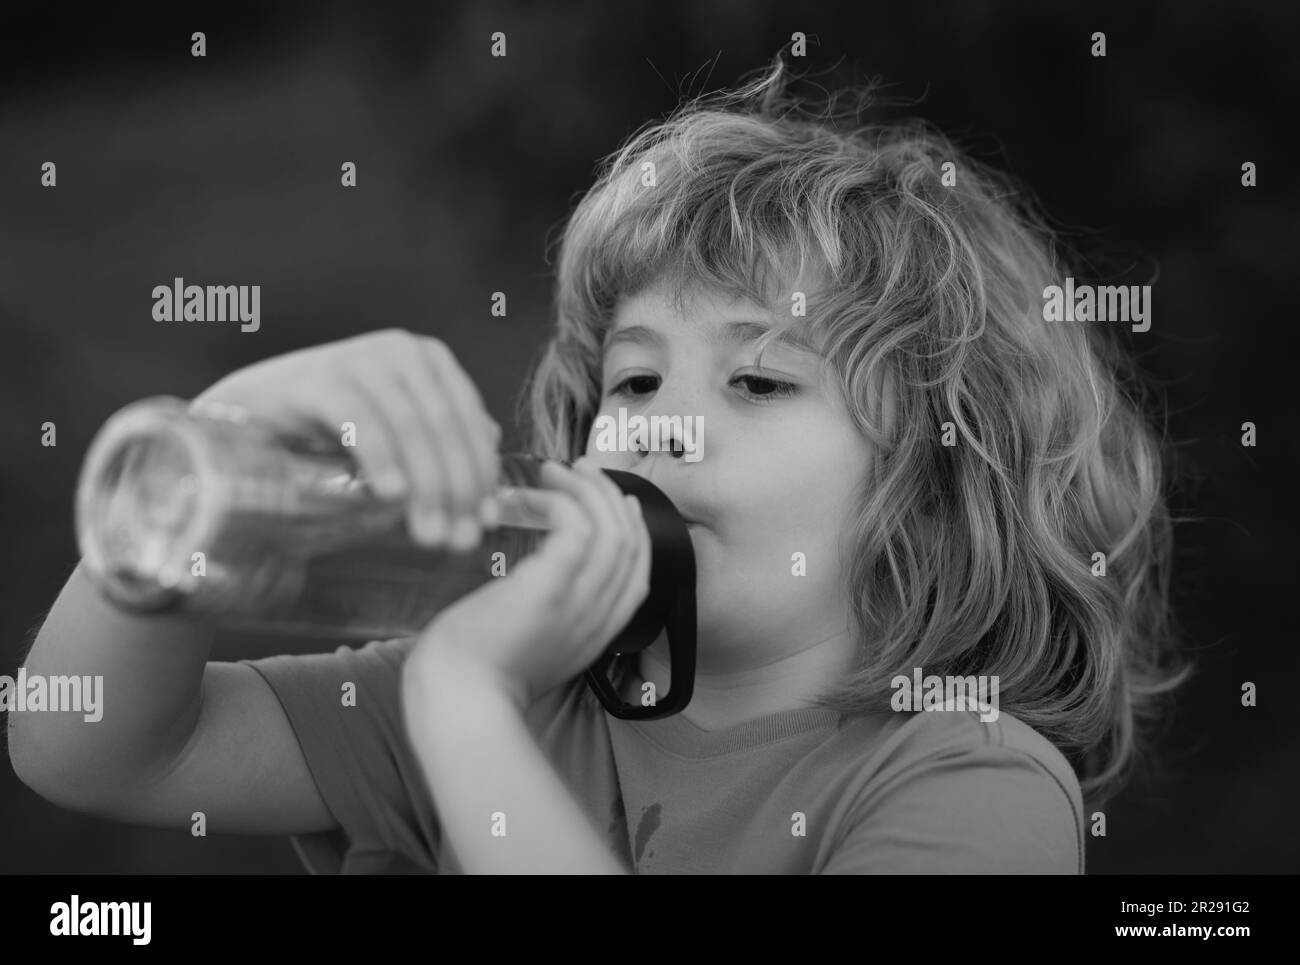 Child drinking water from bottle outdoor in park. Kid drinking. Stock Photo